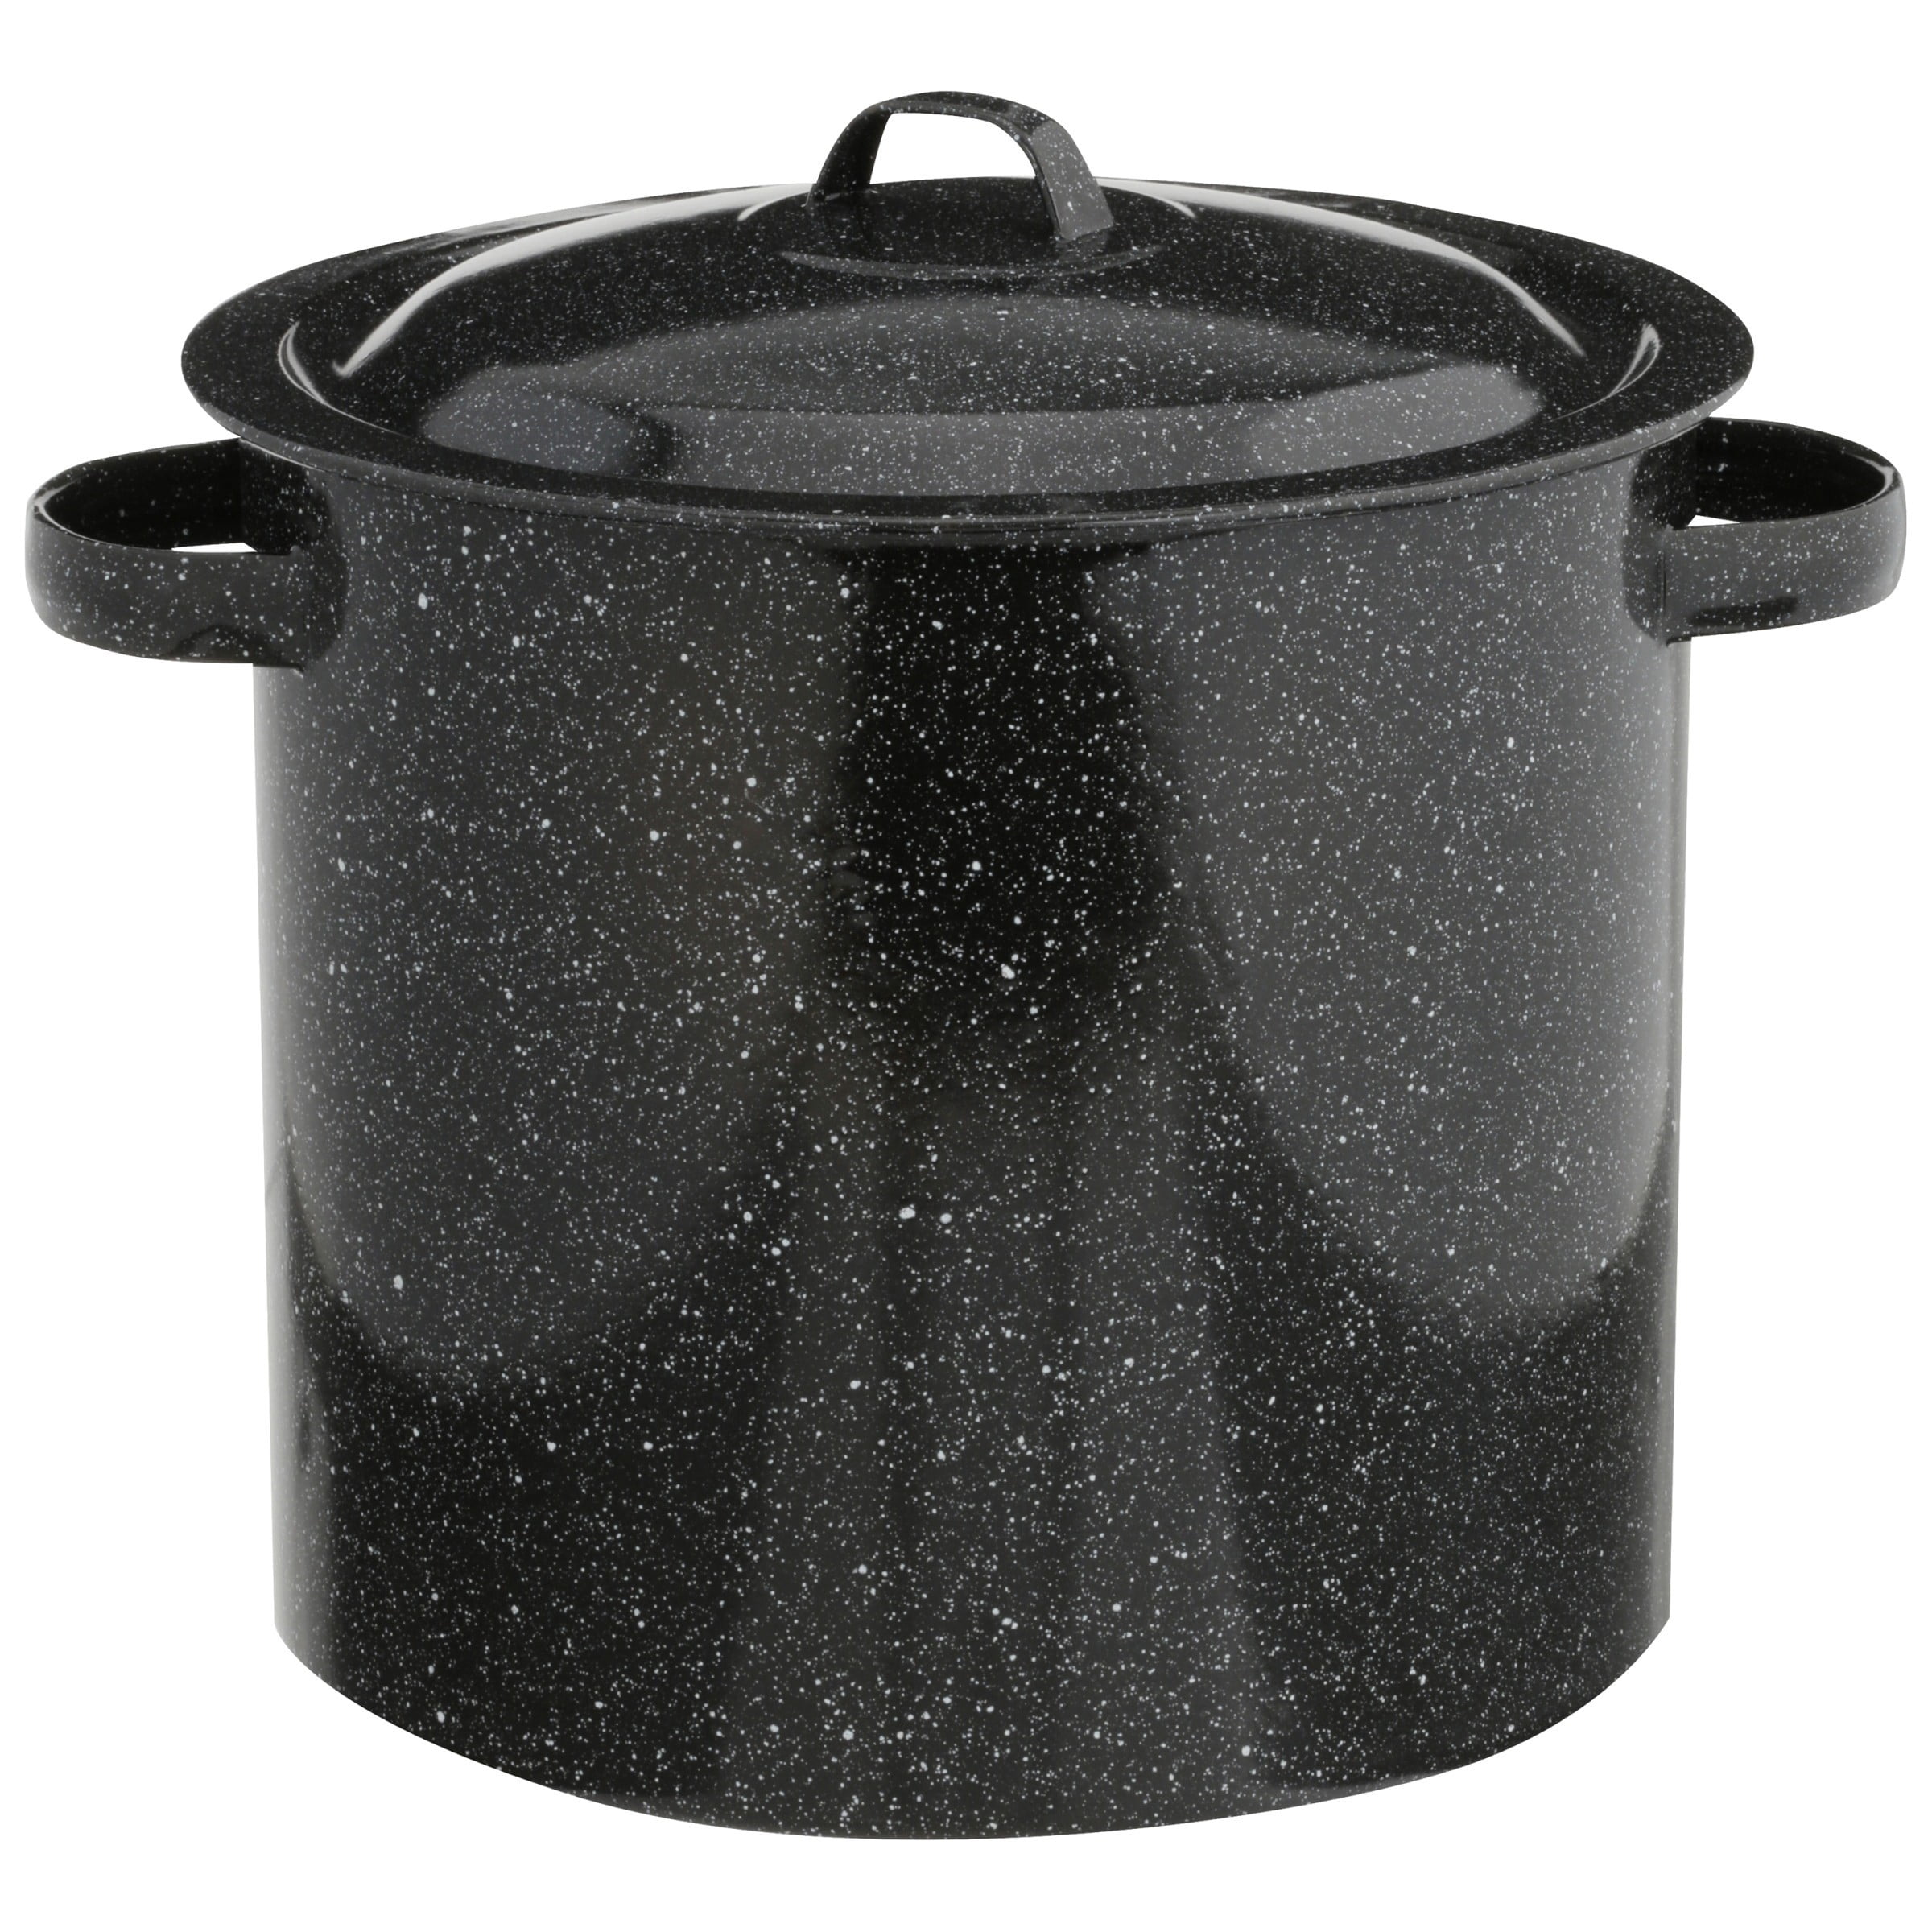 Millvado Granite 12 Qt Stockpot, Nonstick Soup Pot With Lid, Speckled  Enamel Ware Cookware, Large Stock Pot For Boiling and Cooking, Big Granite